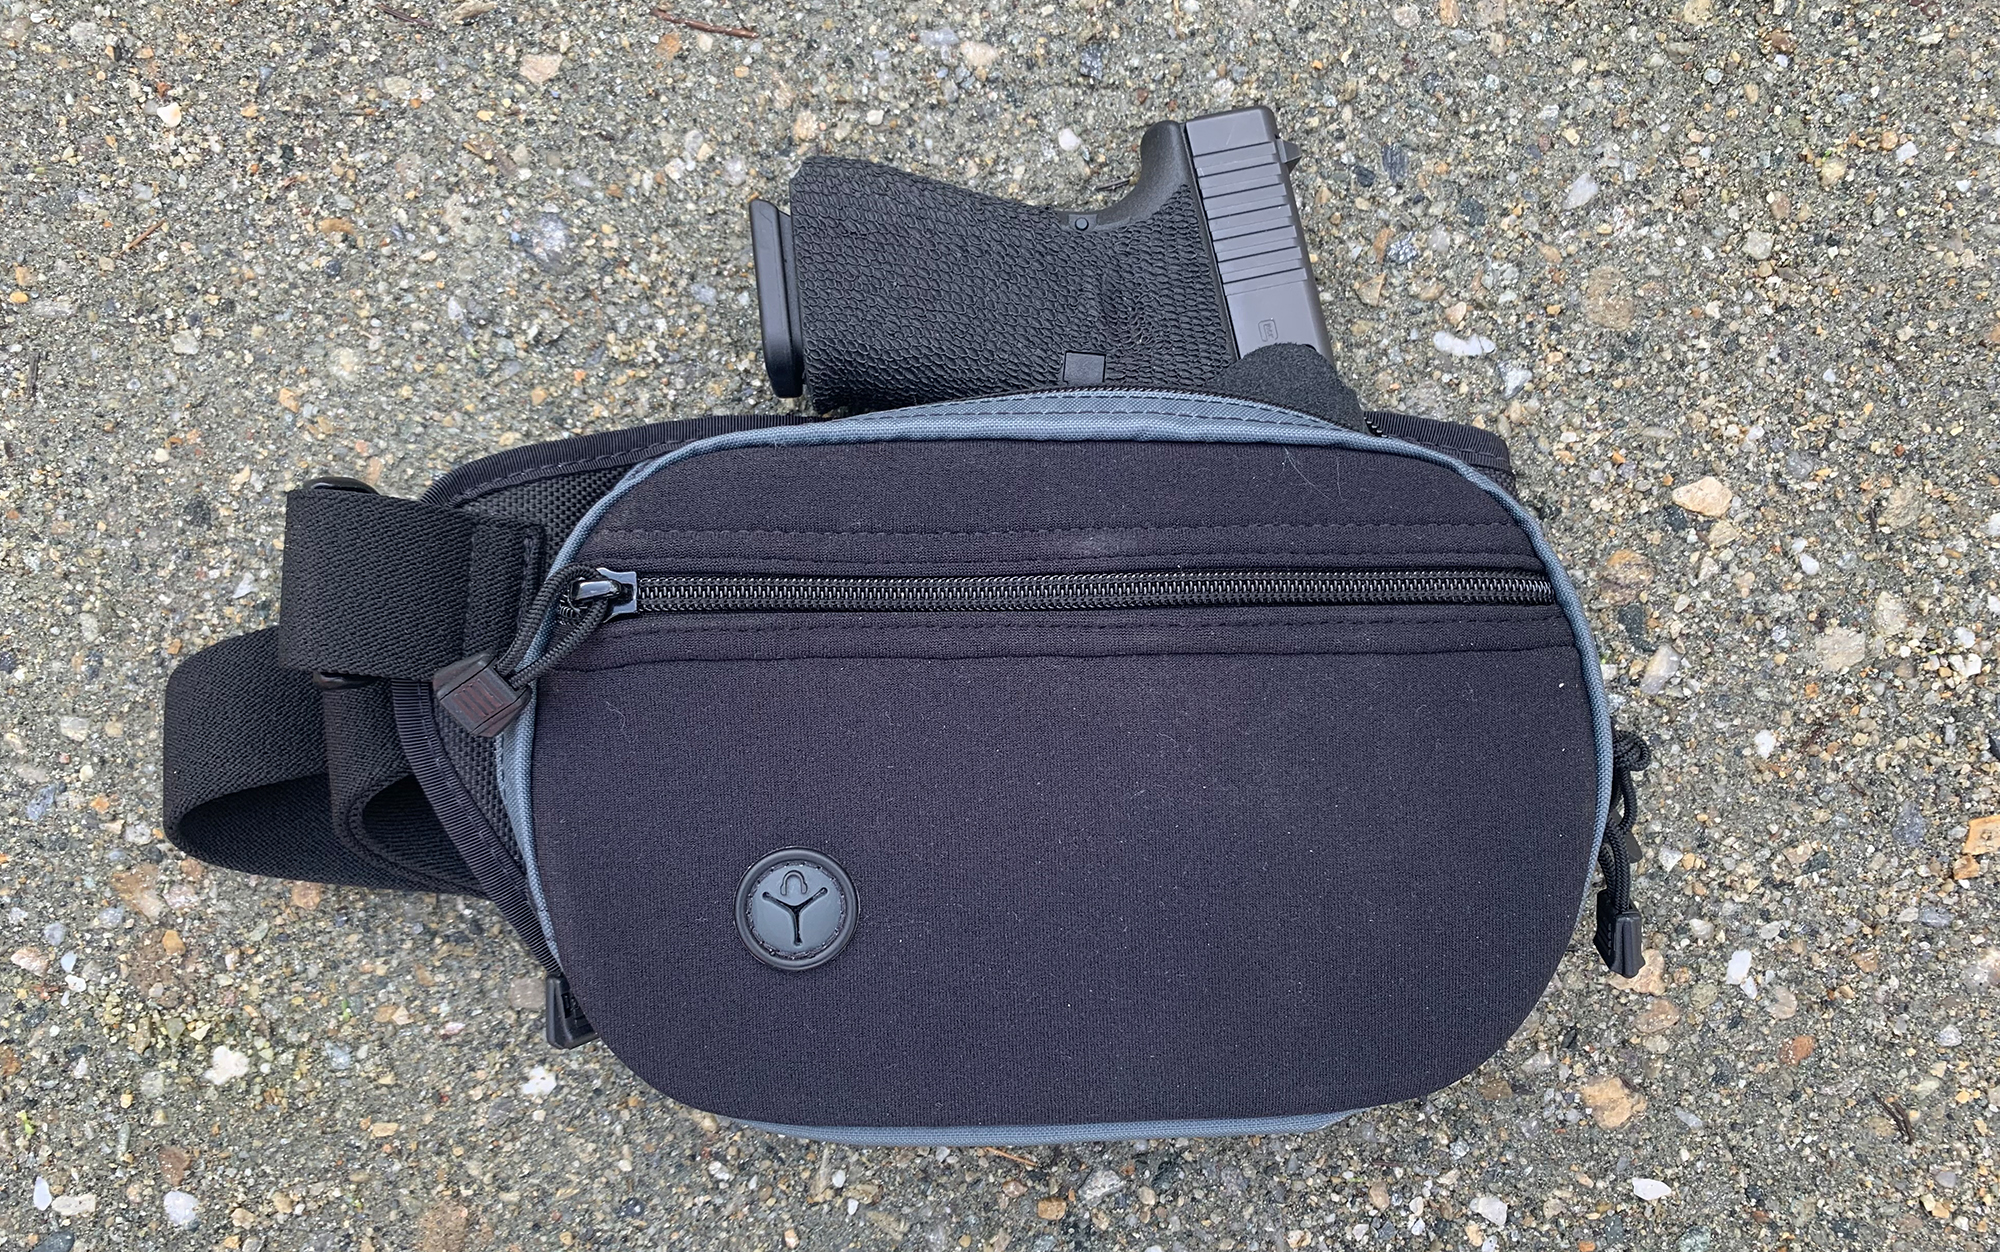 The Galco Fastrax Pac is the best Glock holster for hikers.